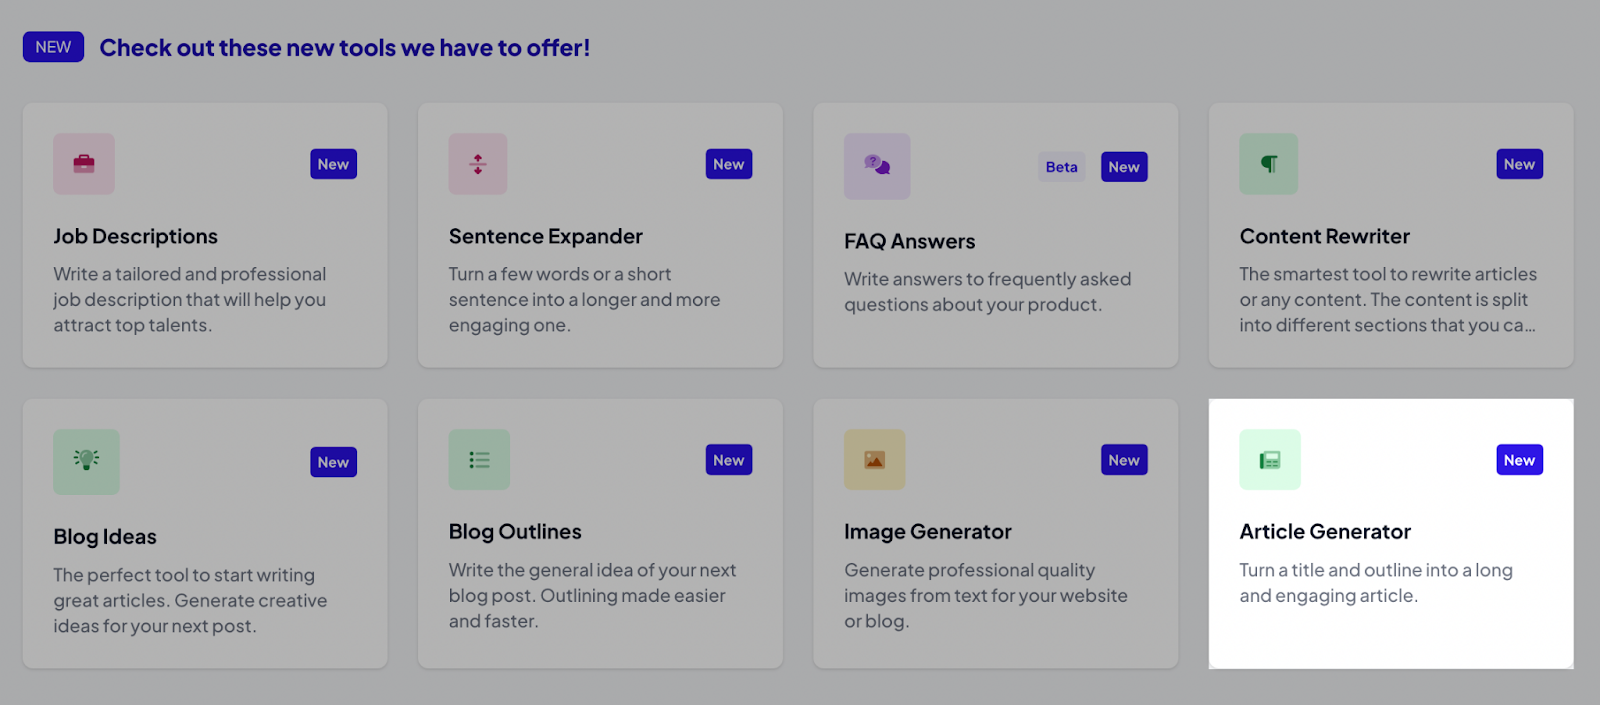 “Article Generator” box highlighted on tools landing page